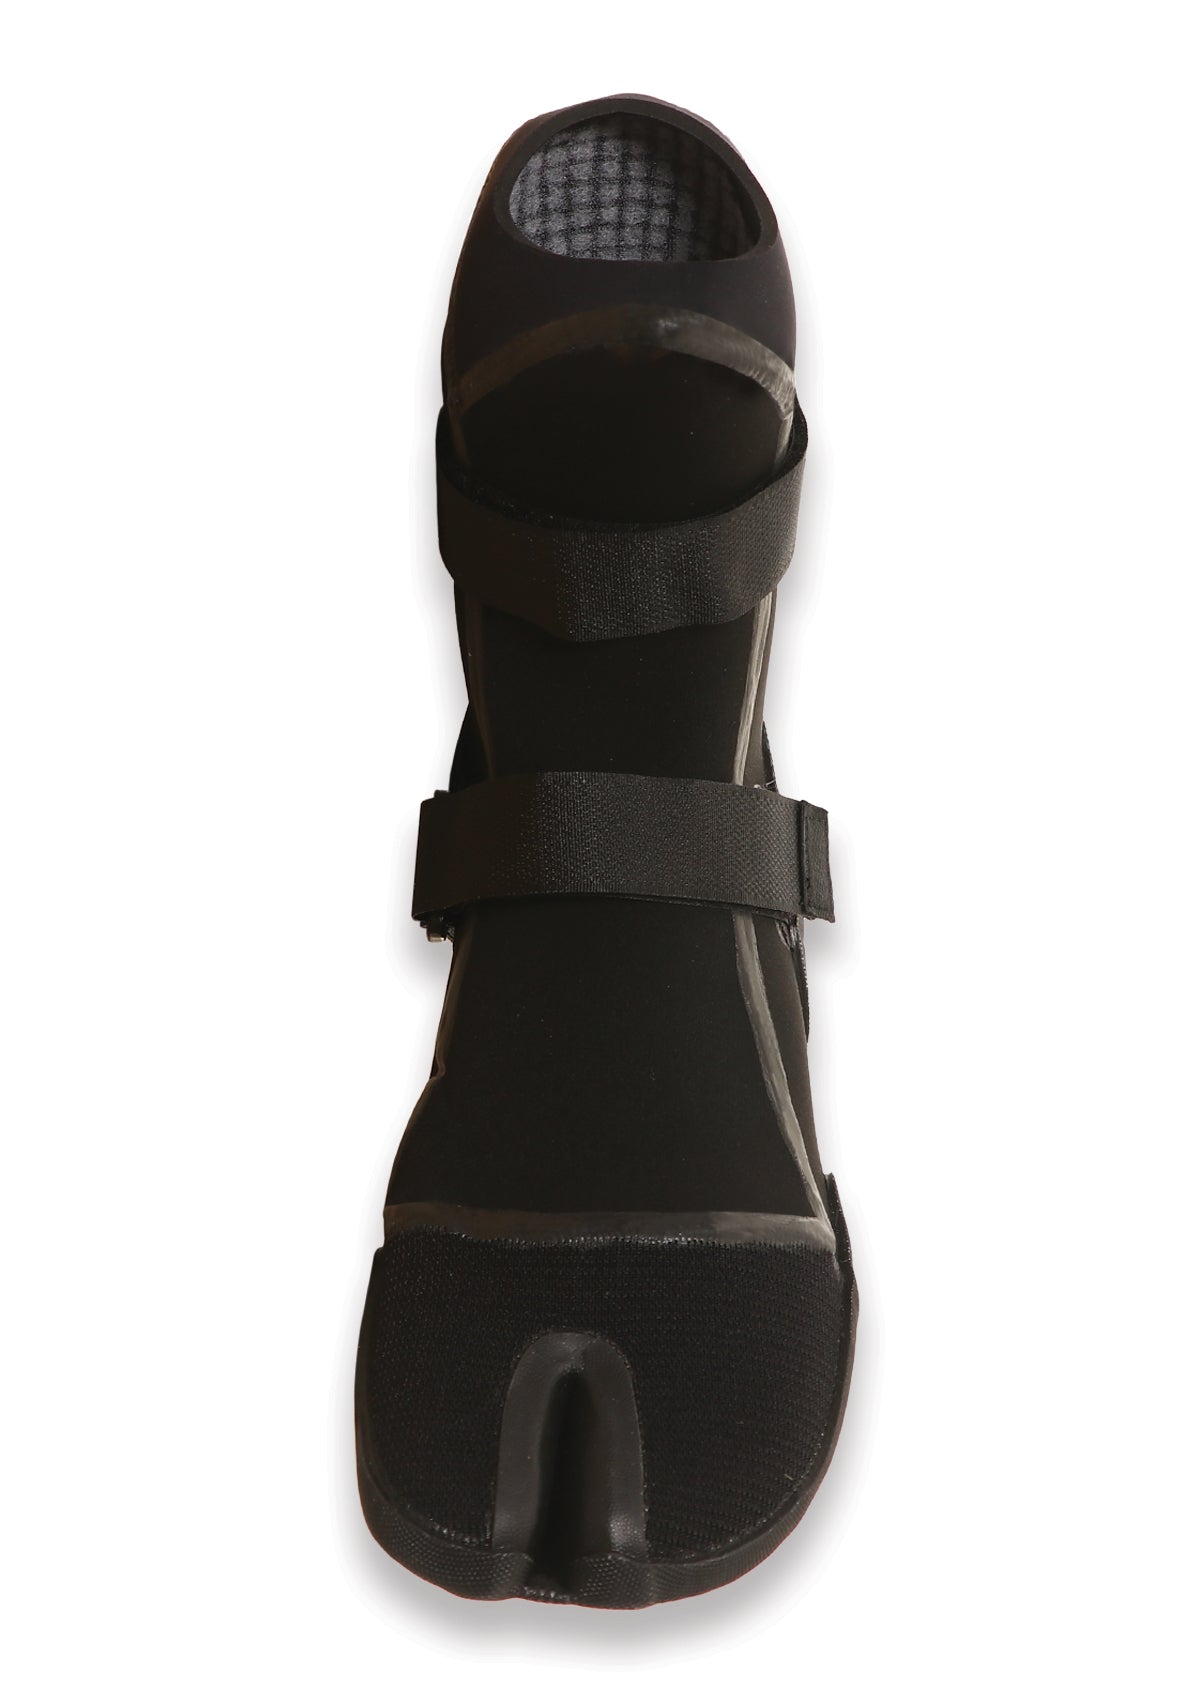 4mm Liquid Taped Thermal Wetsuit Boot